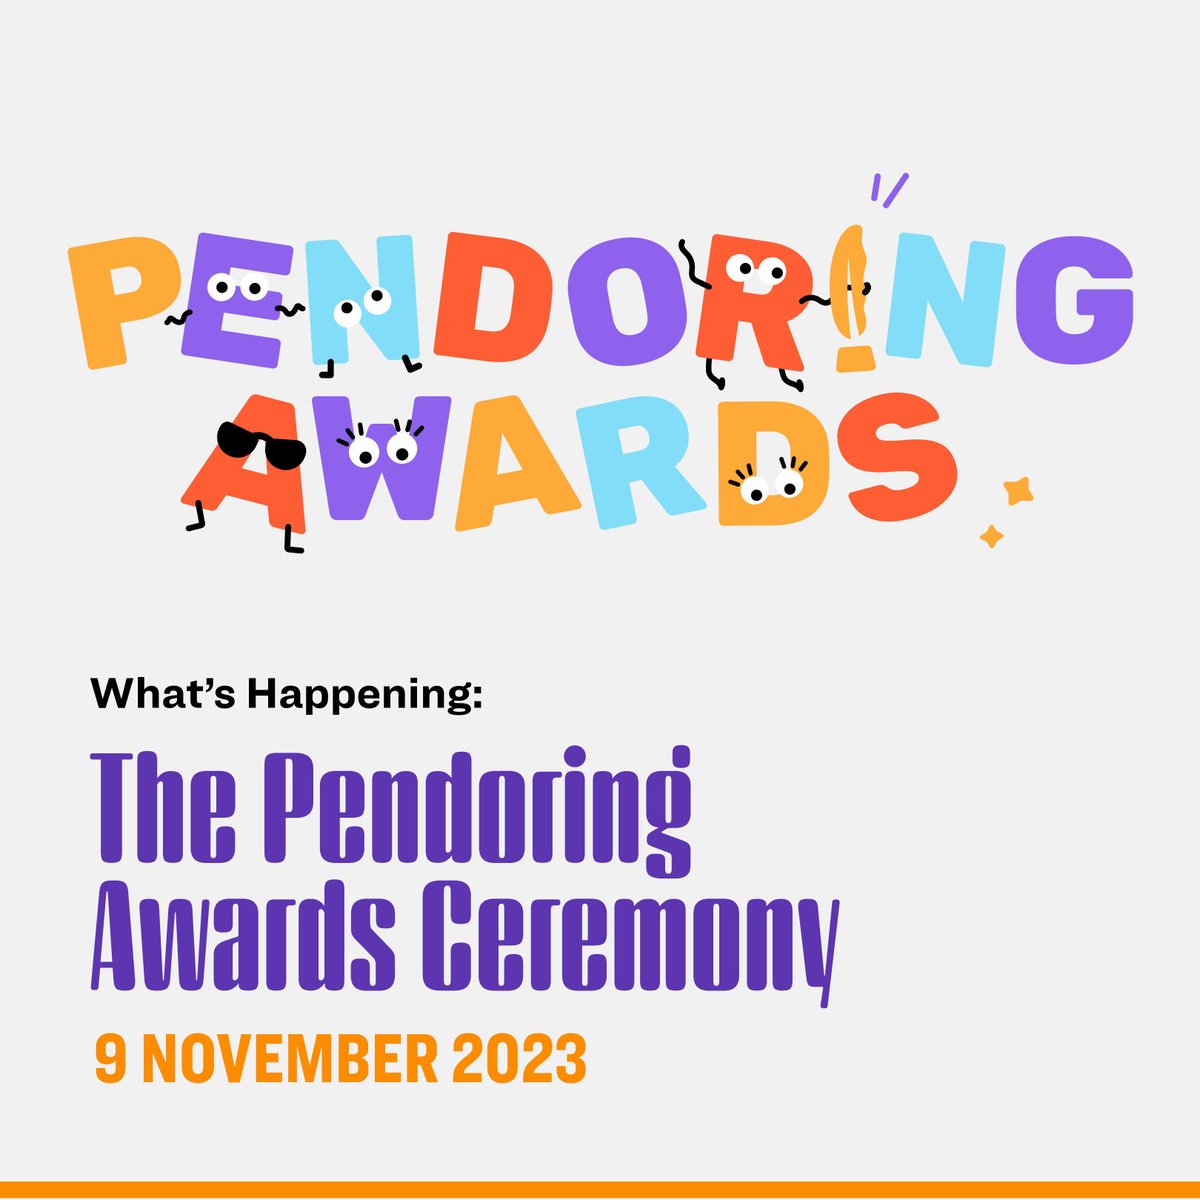 DUMELANG! HAAI! KUNJANI? Have you got your tickets yet? @Pendoring_ presents its annual celebration of creative work in the indigenous languages of South Africa at the University of Johannesburg.

To get your tickets, go to bit.ly/3sHwiqJ  

#Pendoring2023